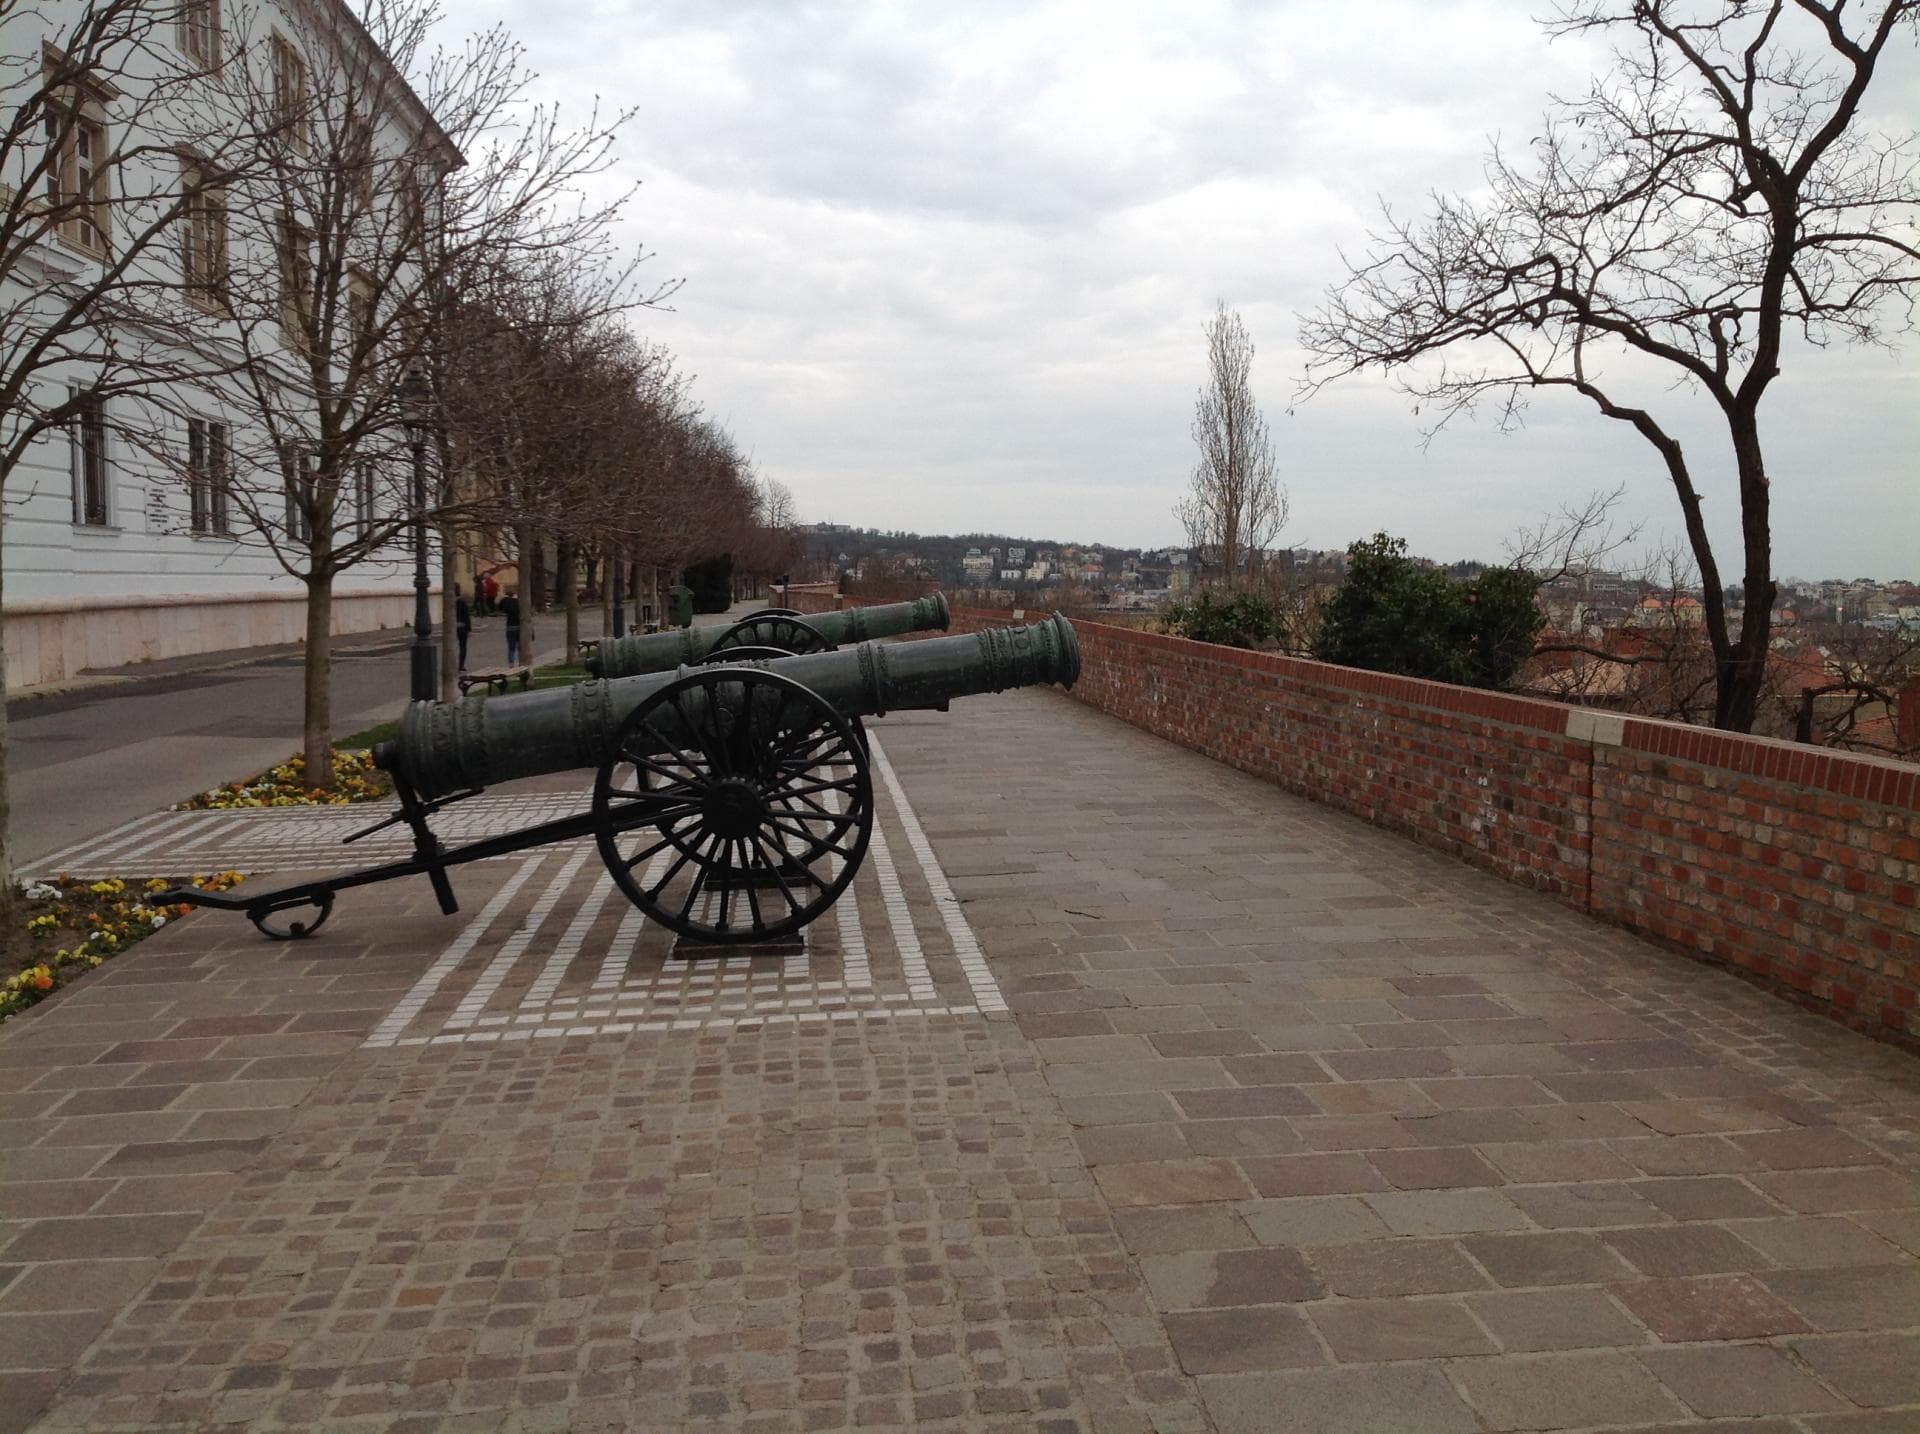 Medieval cannons in Buda Castle